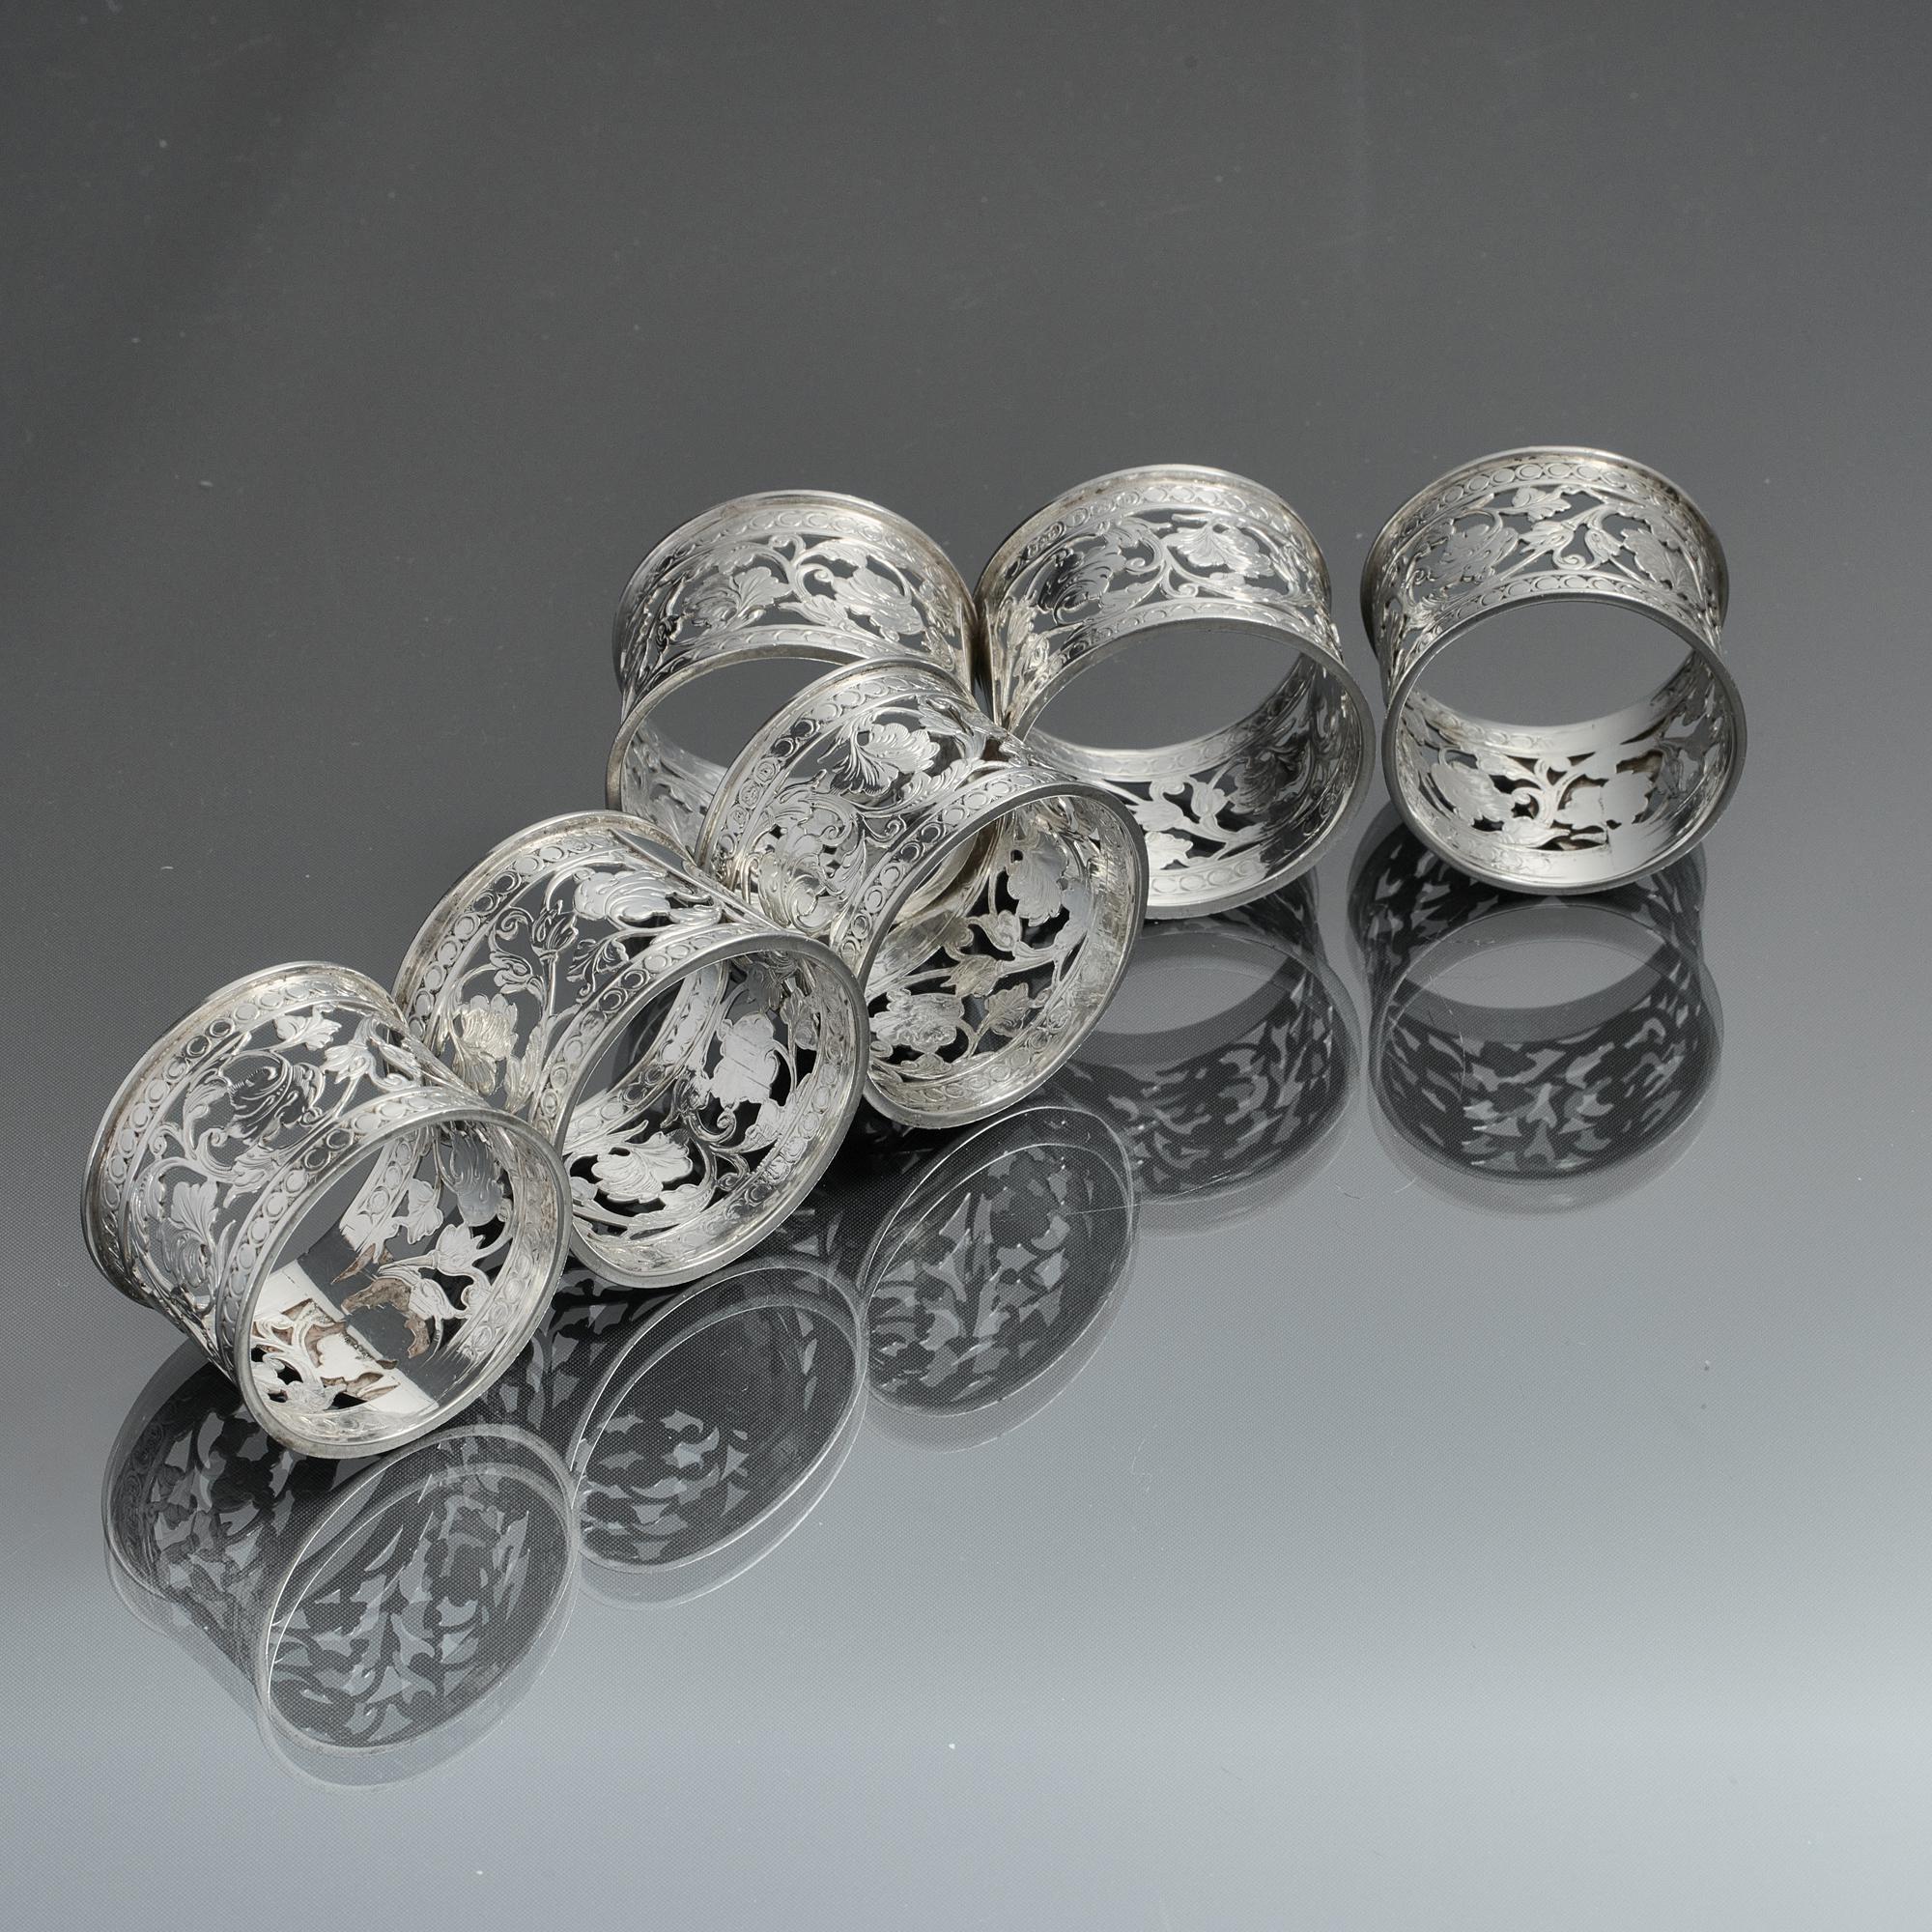 Lovely set of six antique, hand-pierced and engraved silver napkin rings made at the beginning of the Edwardian period. The decorative piercing features trailing foliage between two bands of scrolling roundels and each ring bears an applied silver